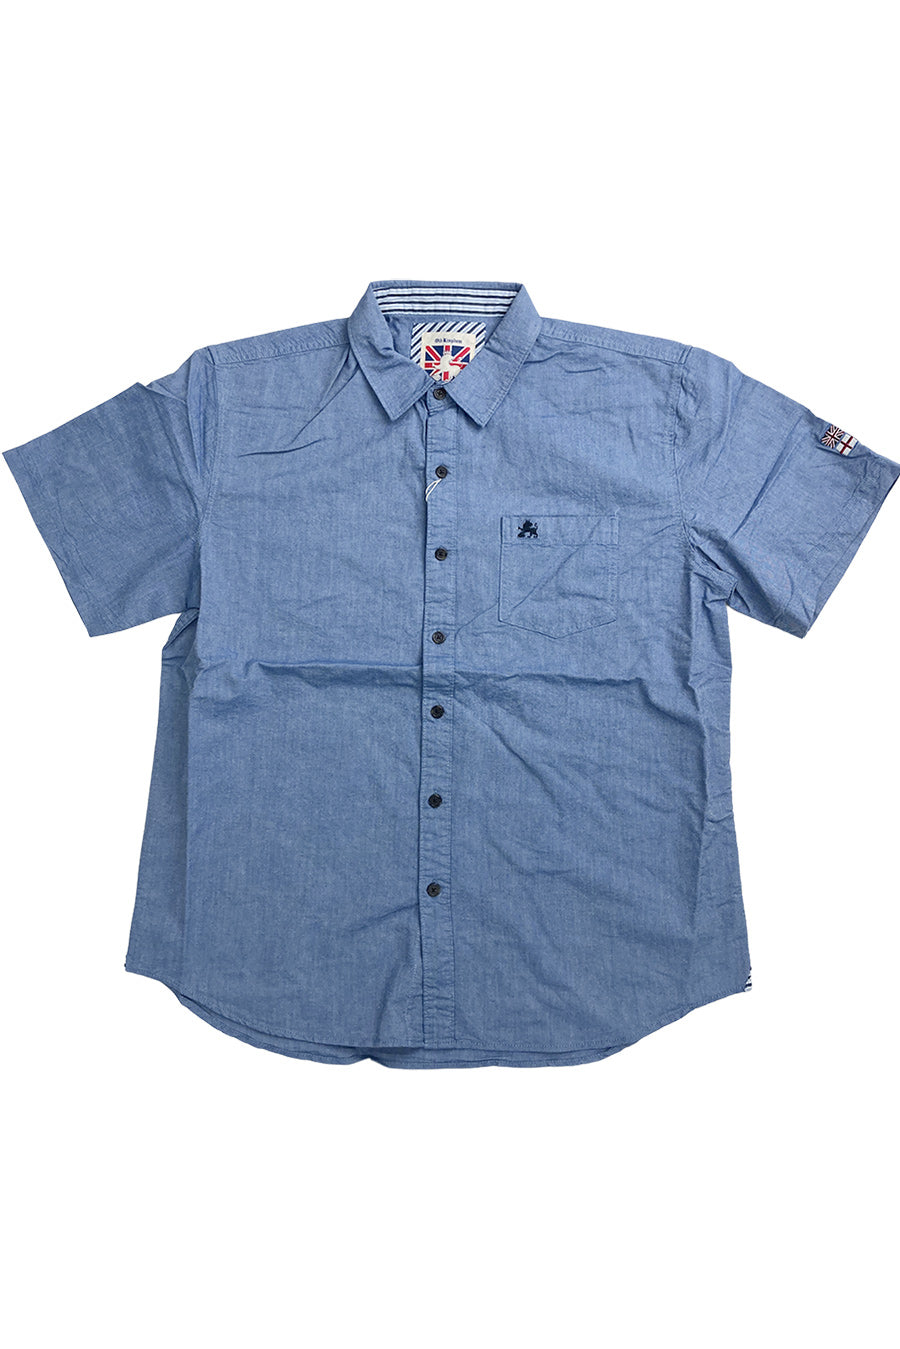 [Sale] [OUTLET] KING SIZE King Size BIG SIZE Big Size Oxford Short Sleeve Shirt Large Size Loose 2L 3L 4L 5L 6L American Casual Casual